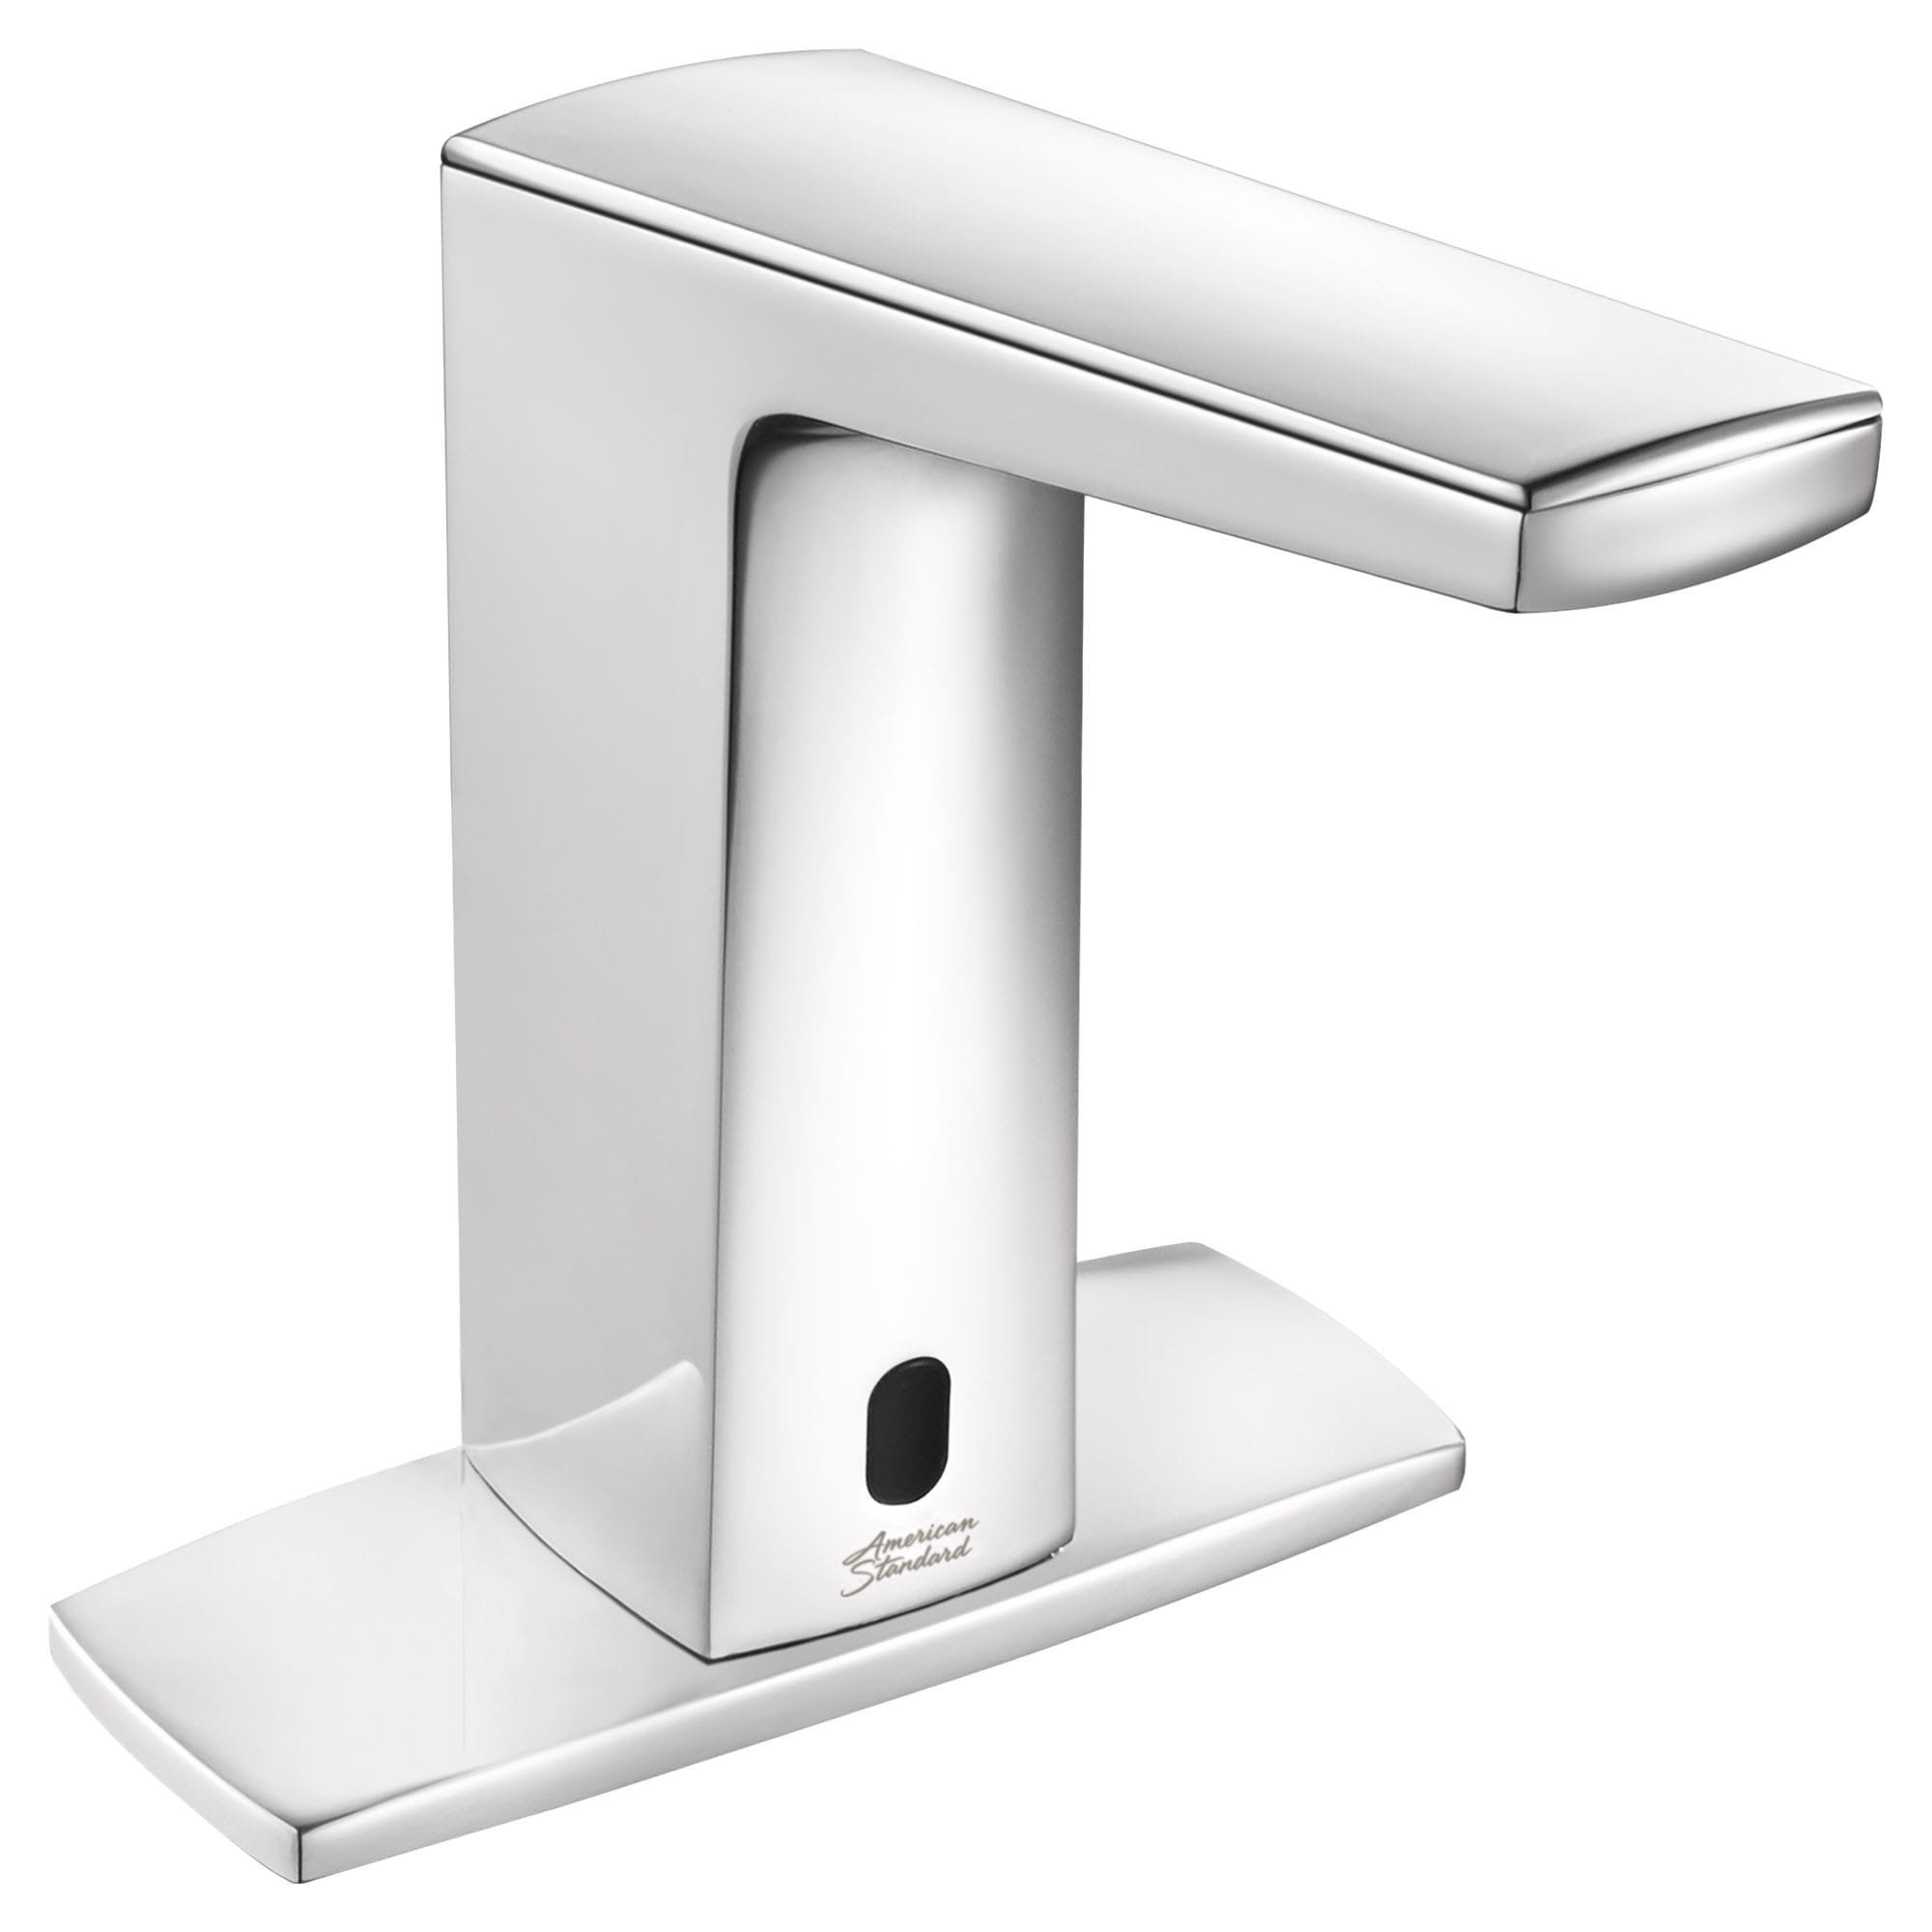 Paradigm® Selectronic® Touchless Faucet, Base Model With Above-Deck Mixing, 0.35 gpm/1.3 Lpm